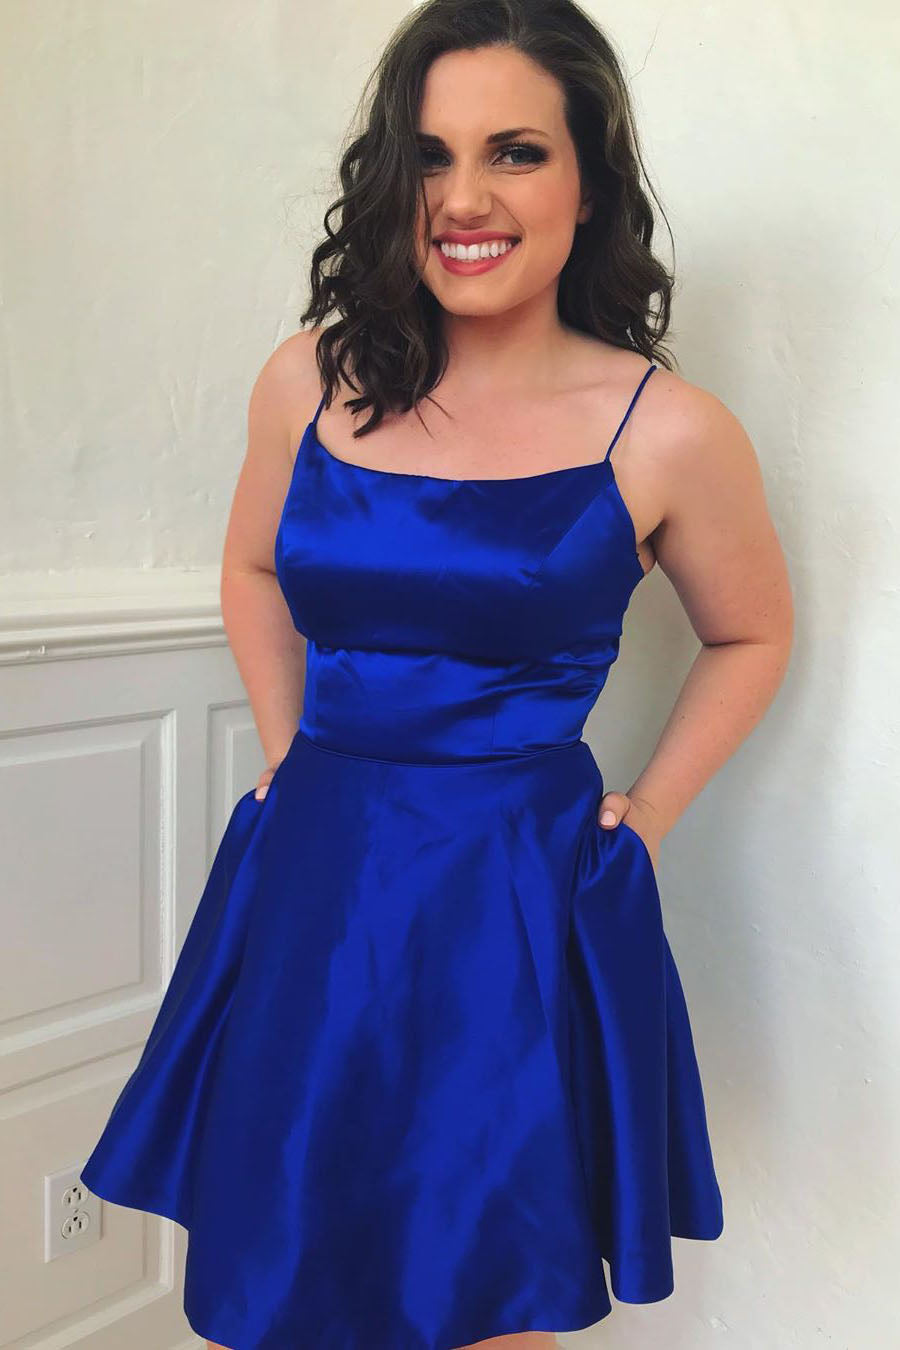 Royal Blue Homecoming Dresses, Hoco Dress, Short Prom Dress, Cocktail Dress, Dance Dresses, Back To School Party Gown, PC0891